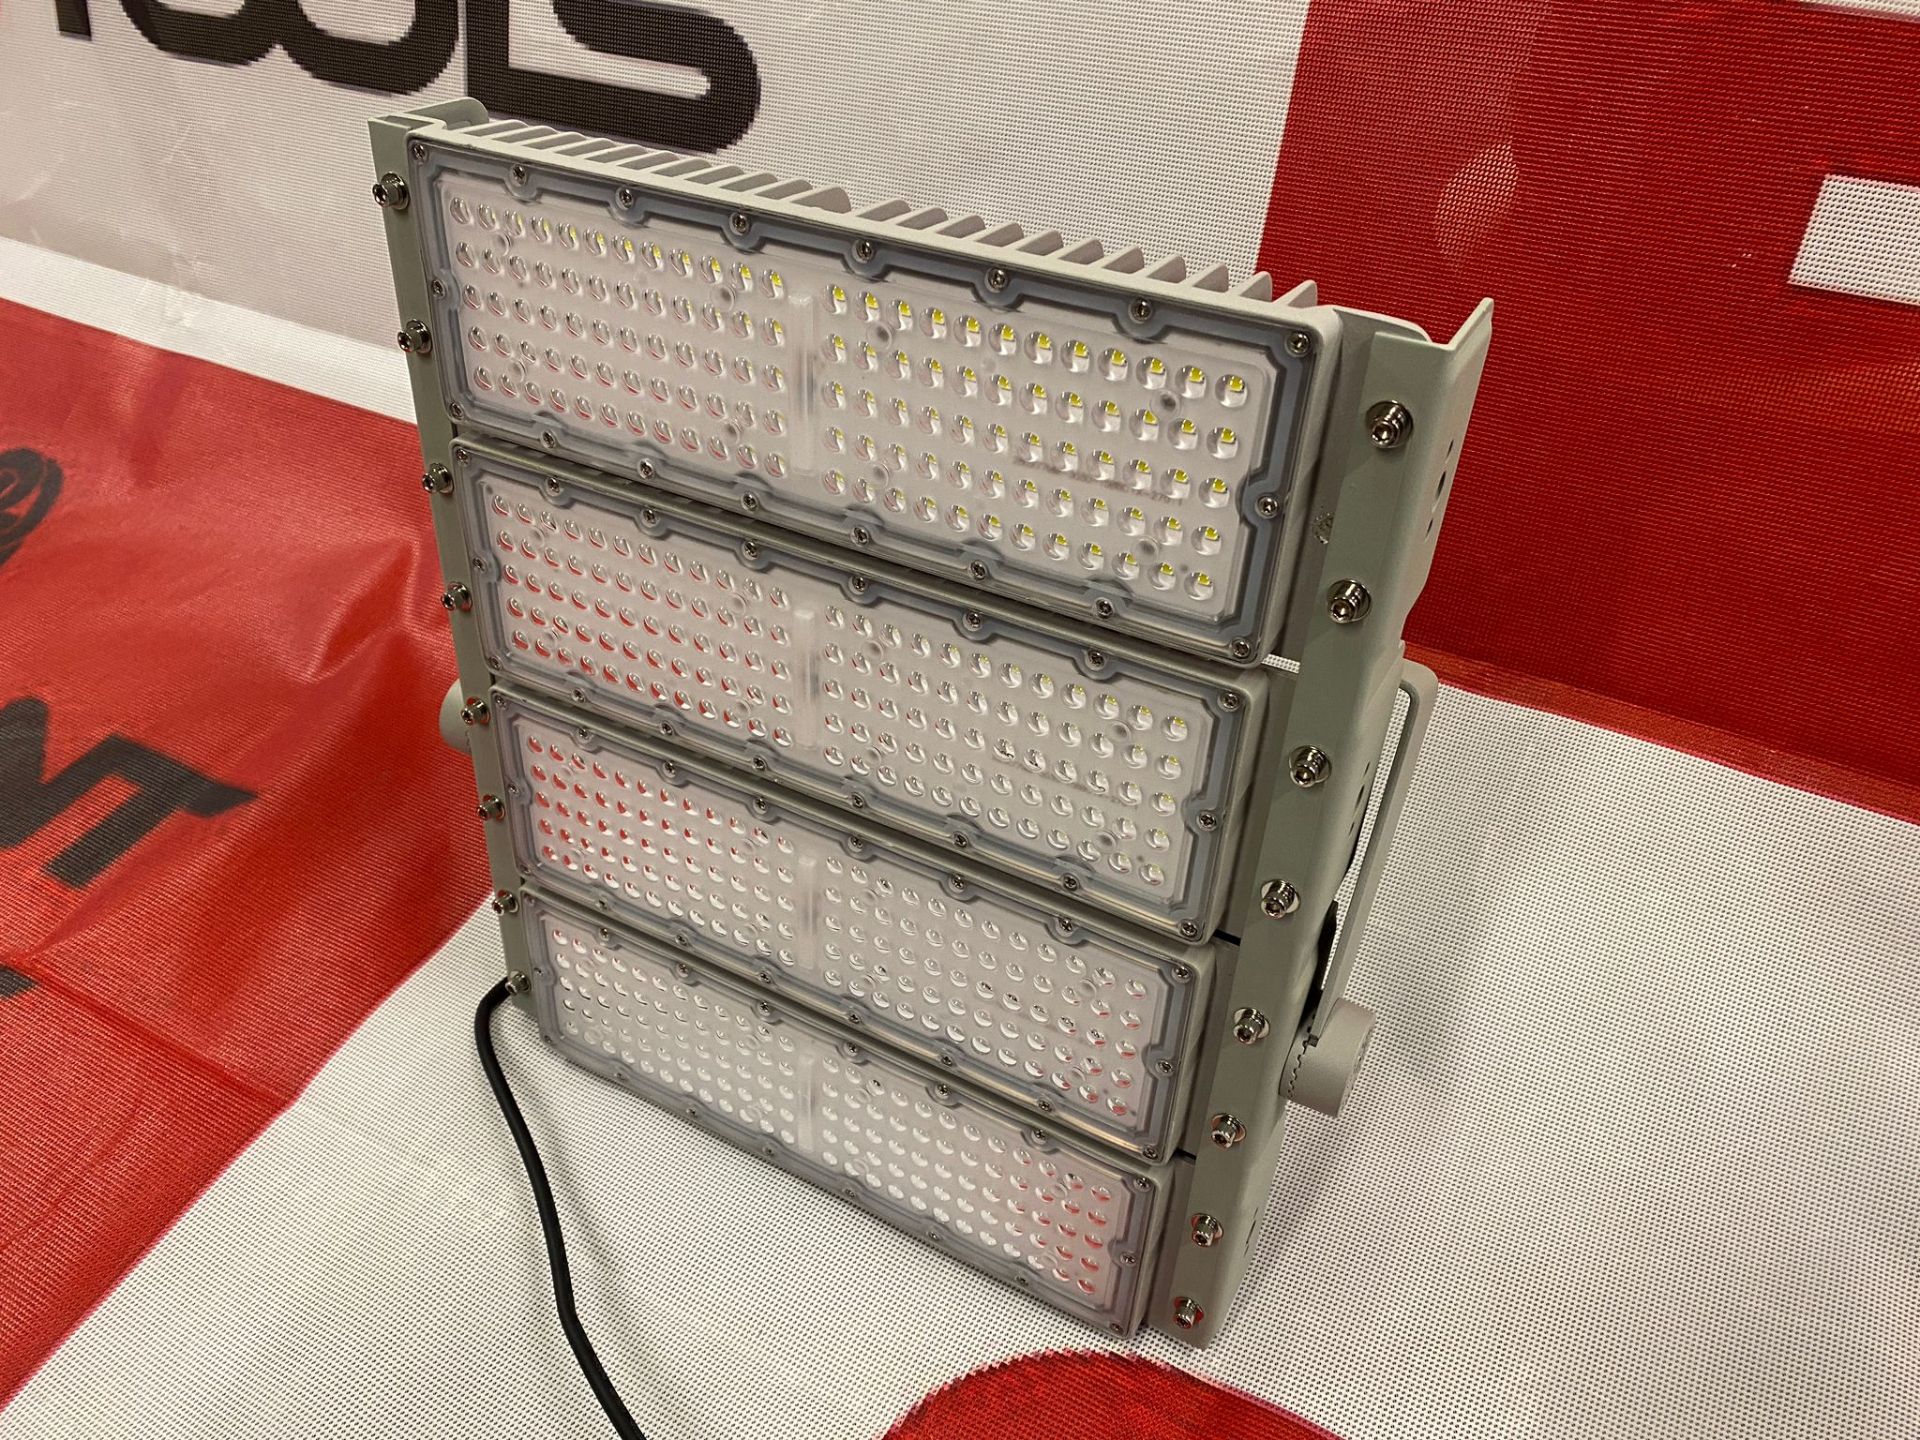 2 x LED400 Watt Flood Light Panel - For Car Parks, Security, Playing fields, Football pitches etc - Image 2 of 8